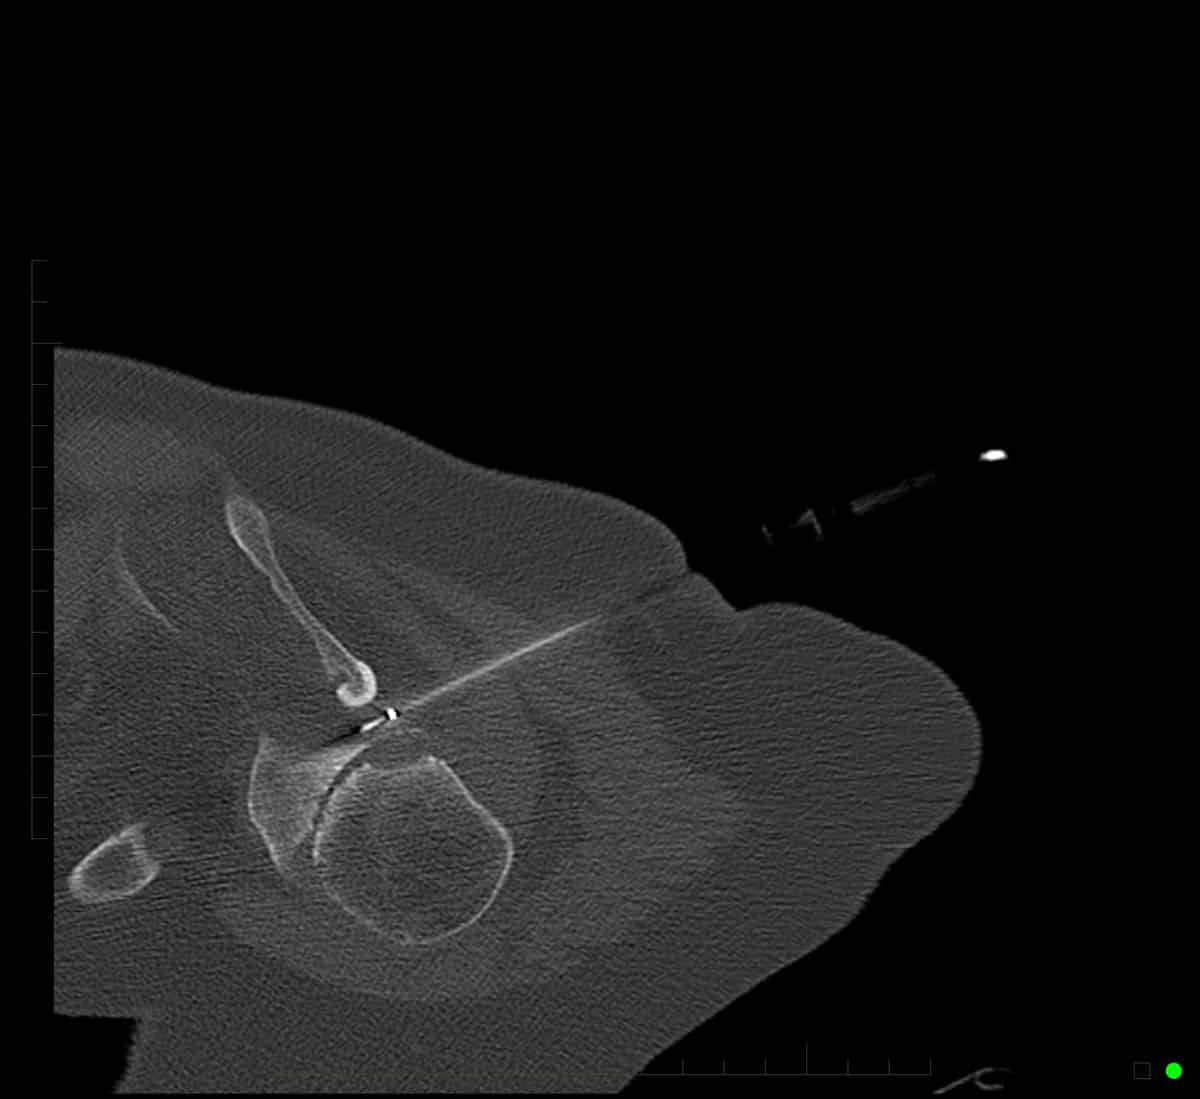 Radiofrequency Ablation - Performed with CT imaging guidance to the suprascapular nerve of the shoulder